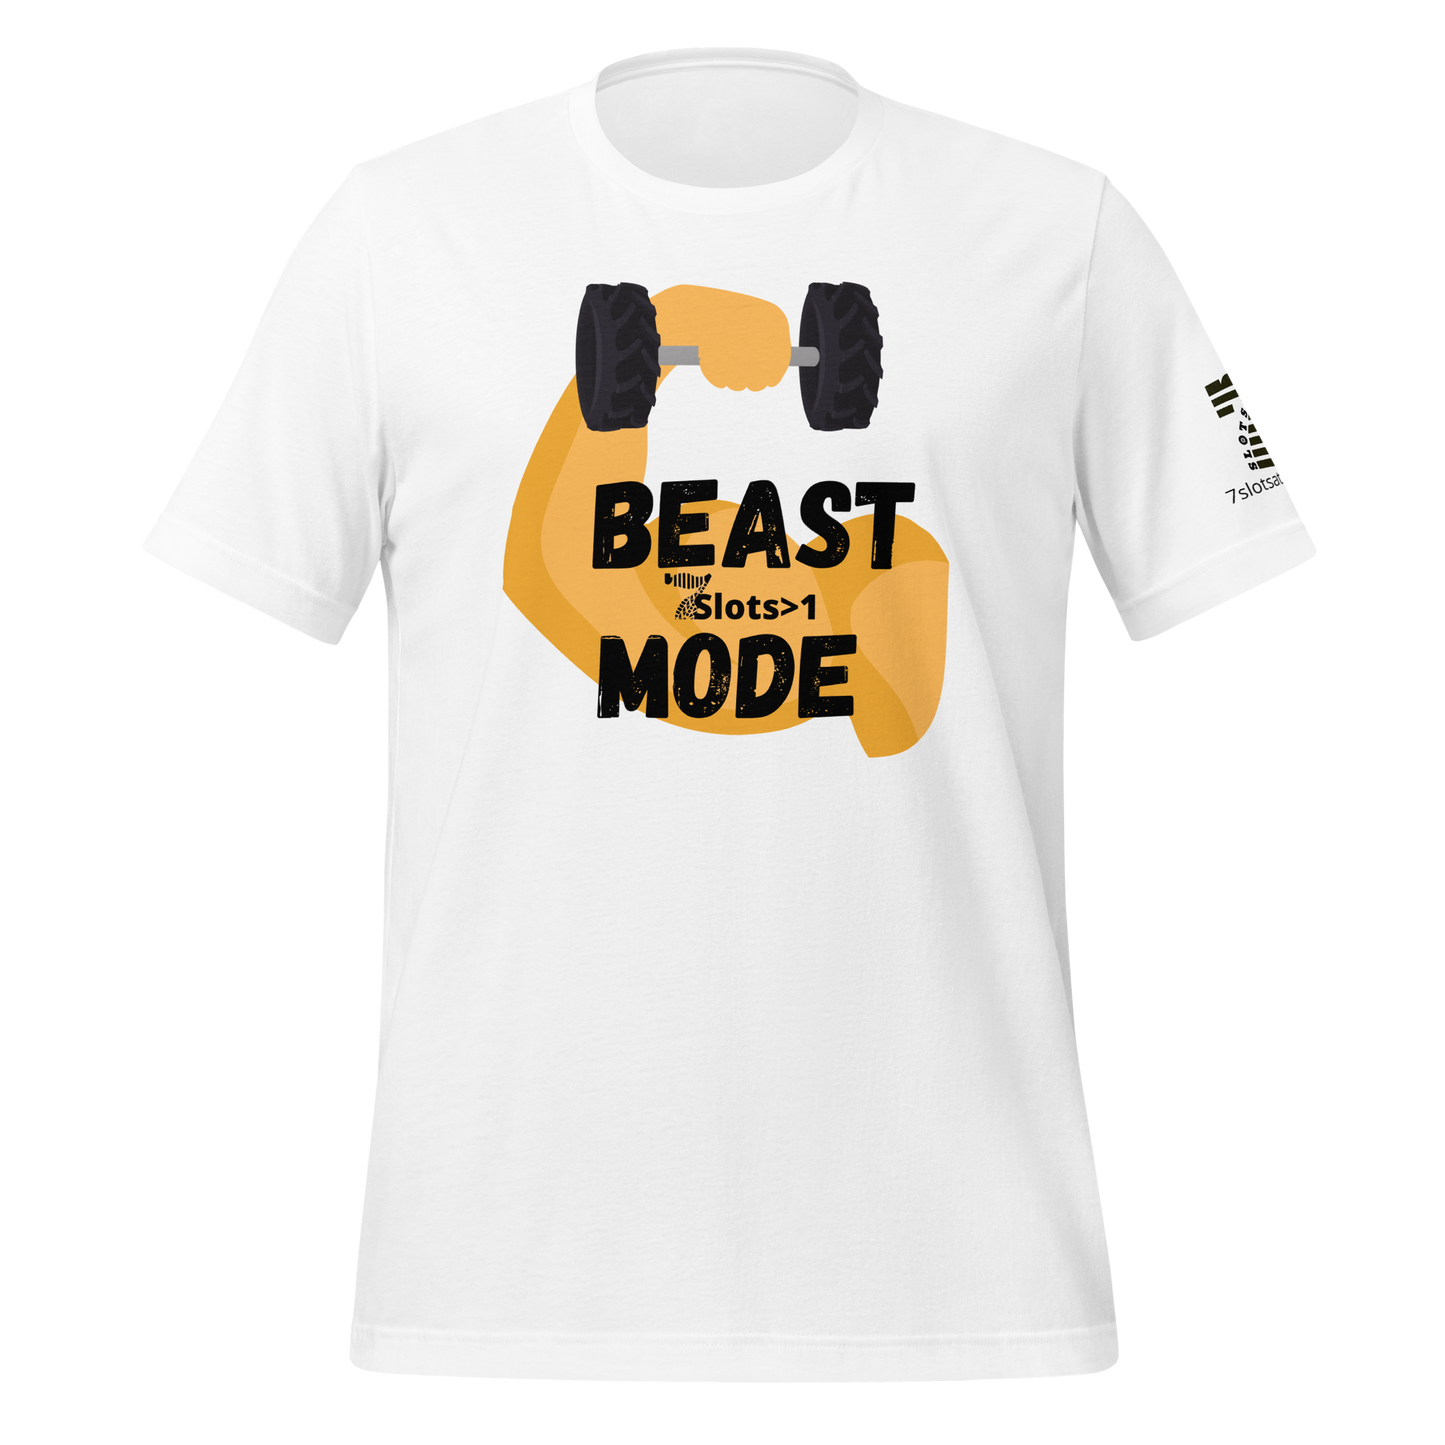 Beast Mode Activated!